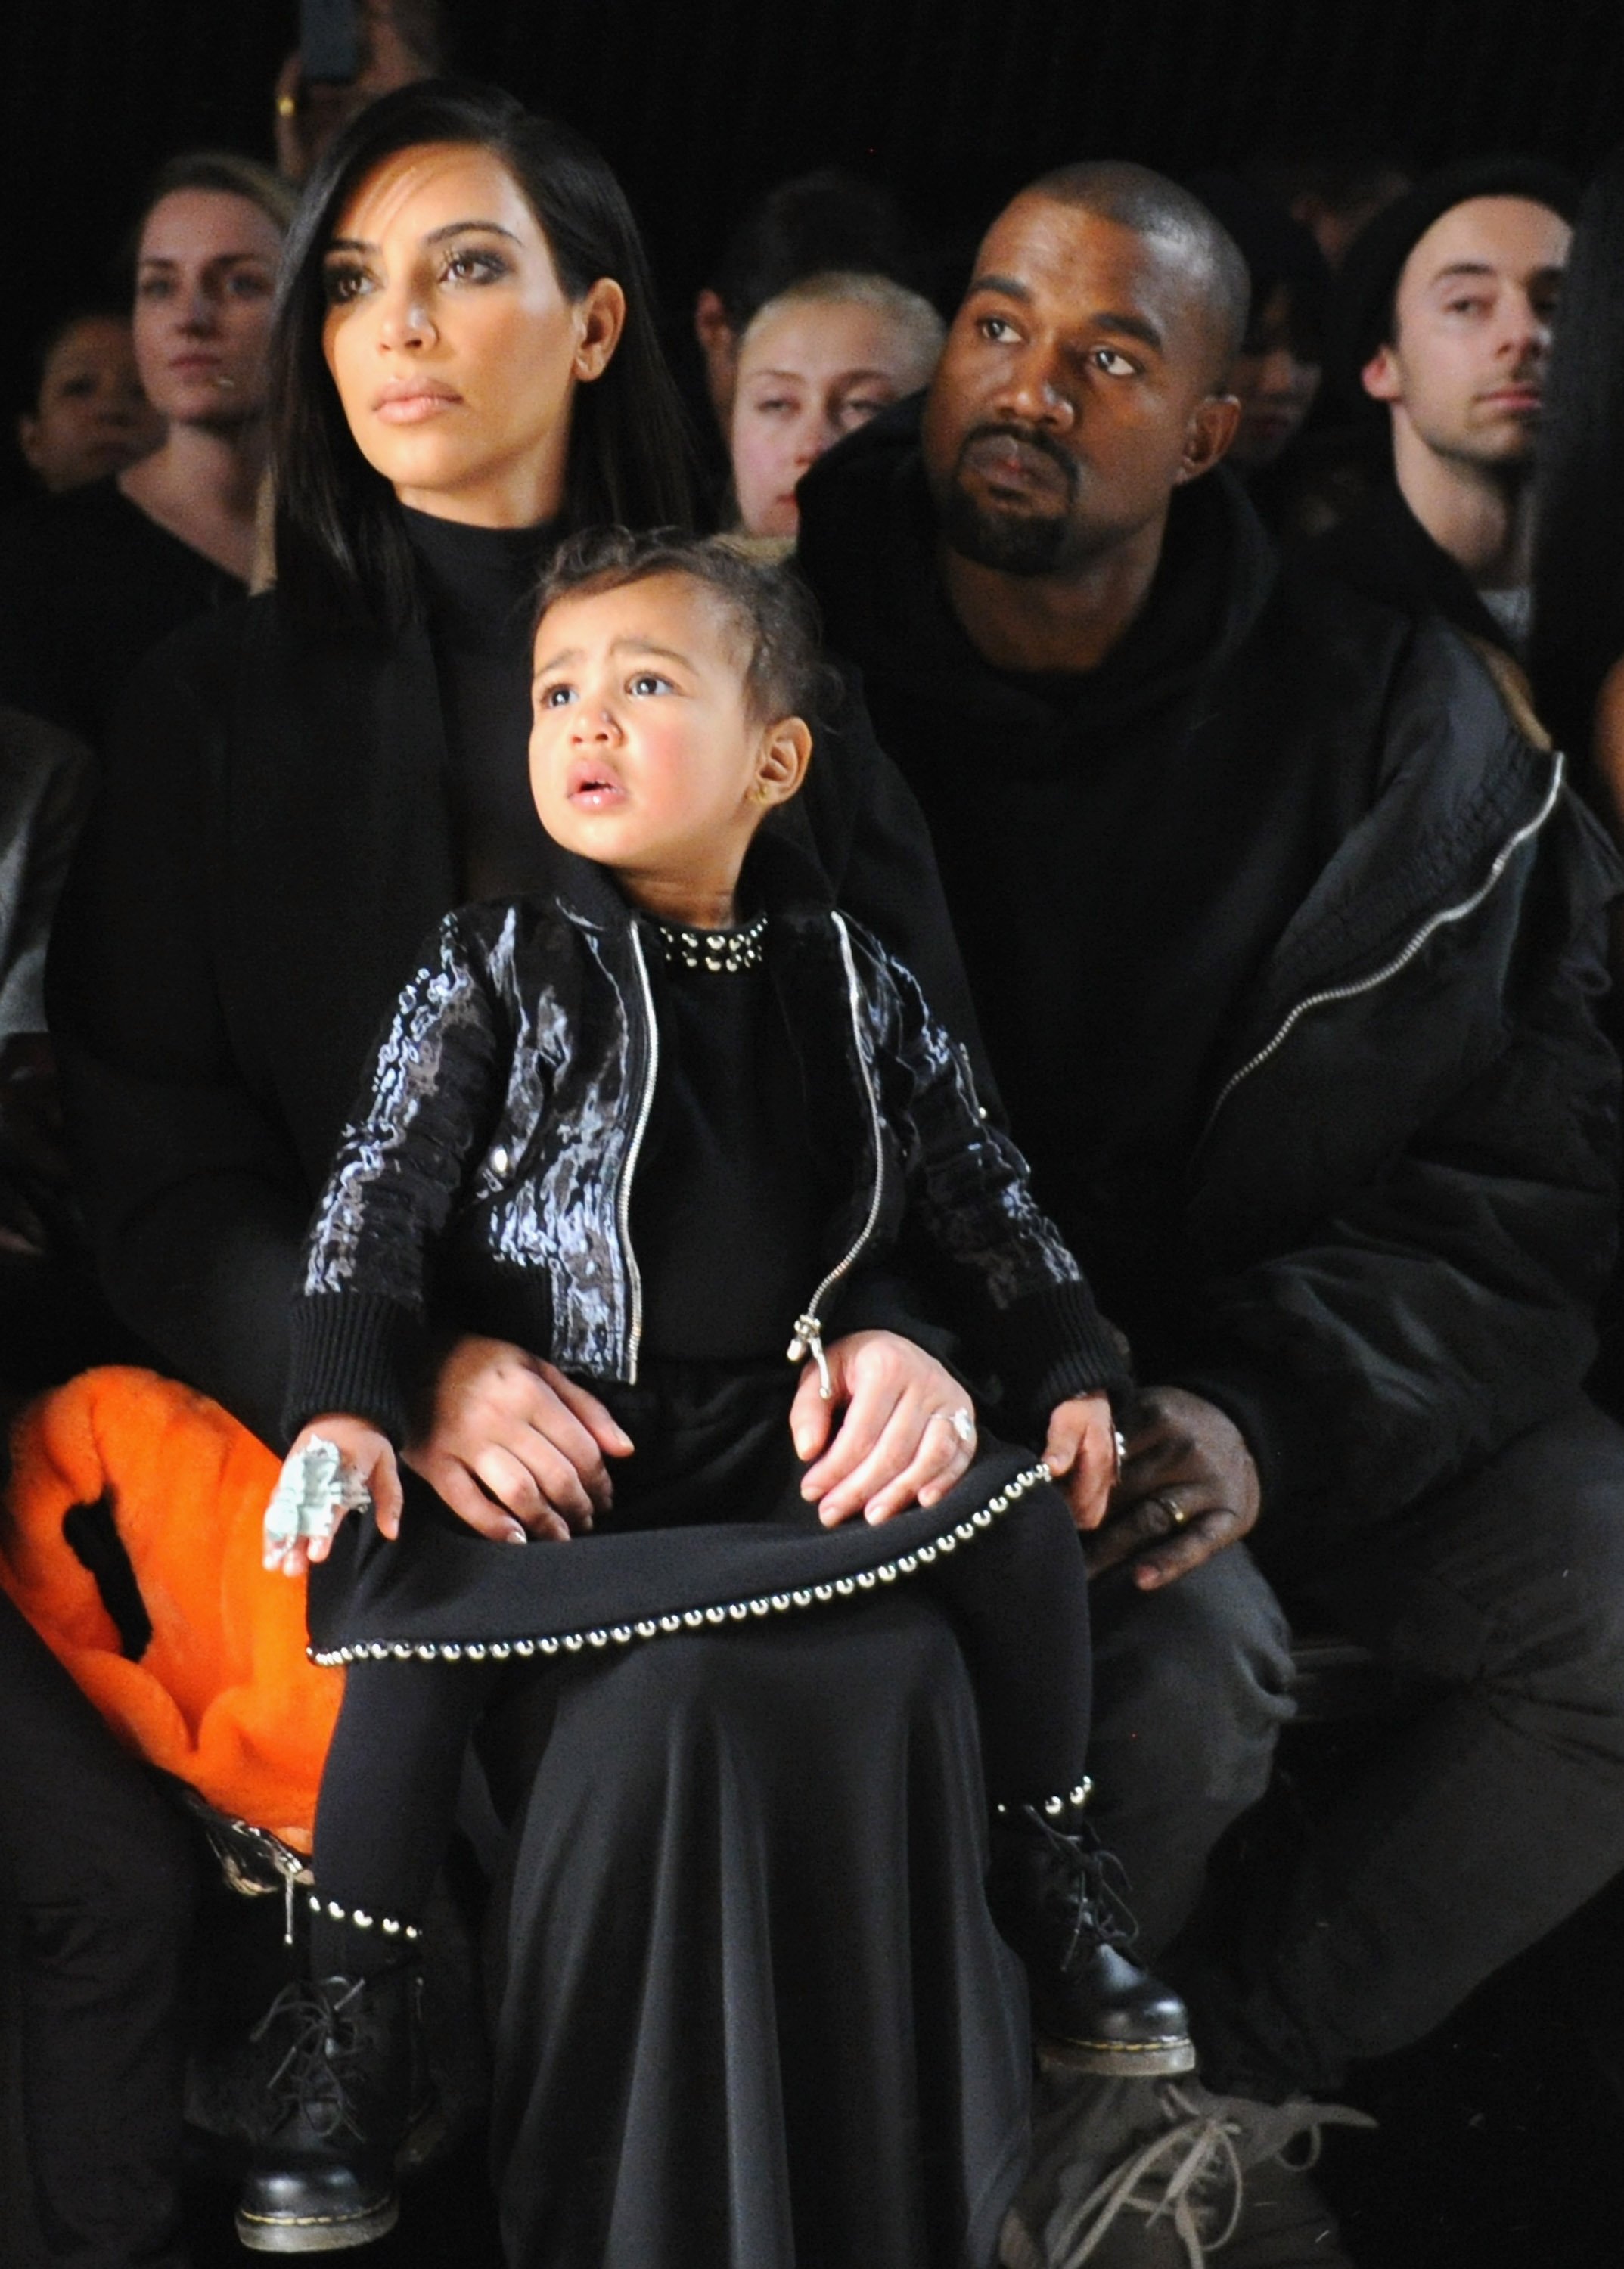 Kim Kardashian, North West and Kanye West attend the Alexander Wang Fashion Show during Mercedes-Benz Fashion Week Fall 2015 at Pier 94 on February 14, 2015, in New York City. | Source: Getty Images.